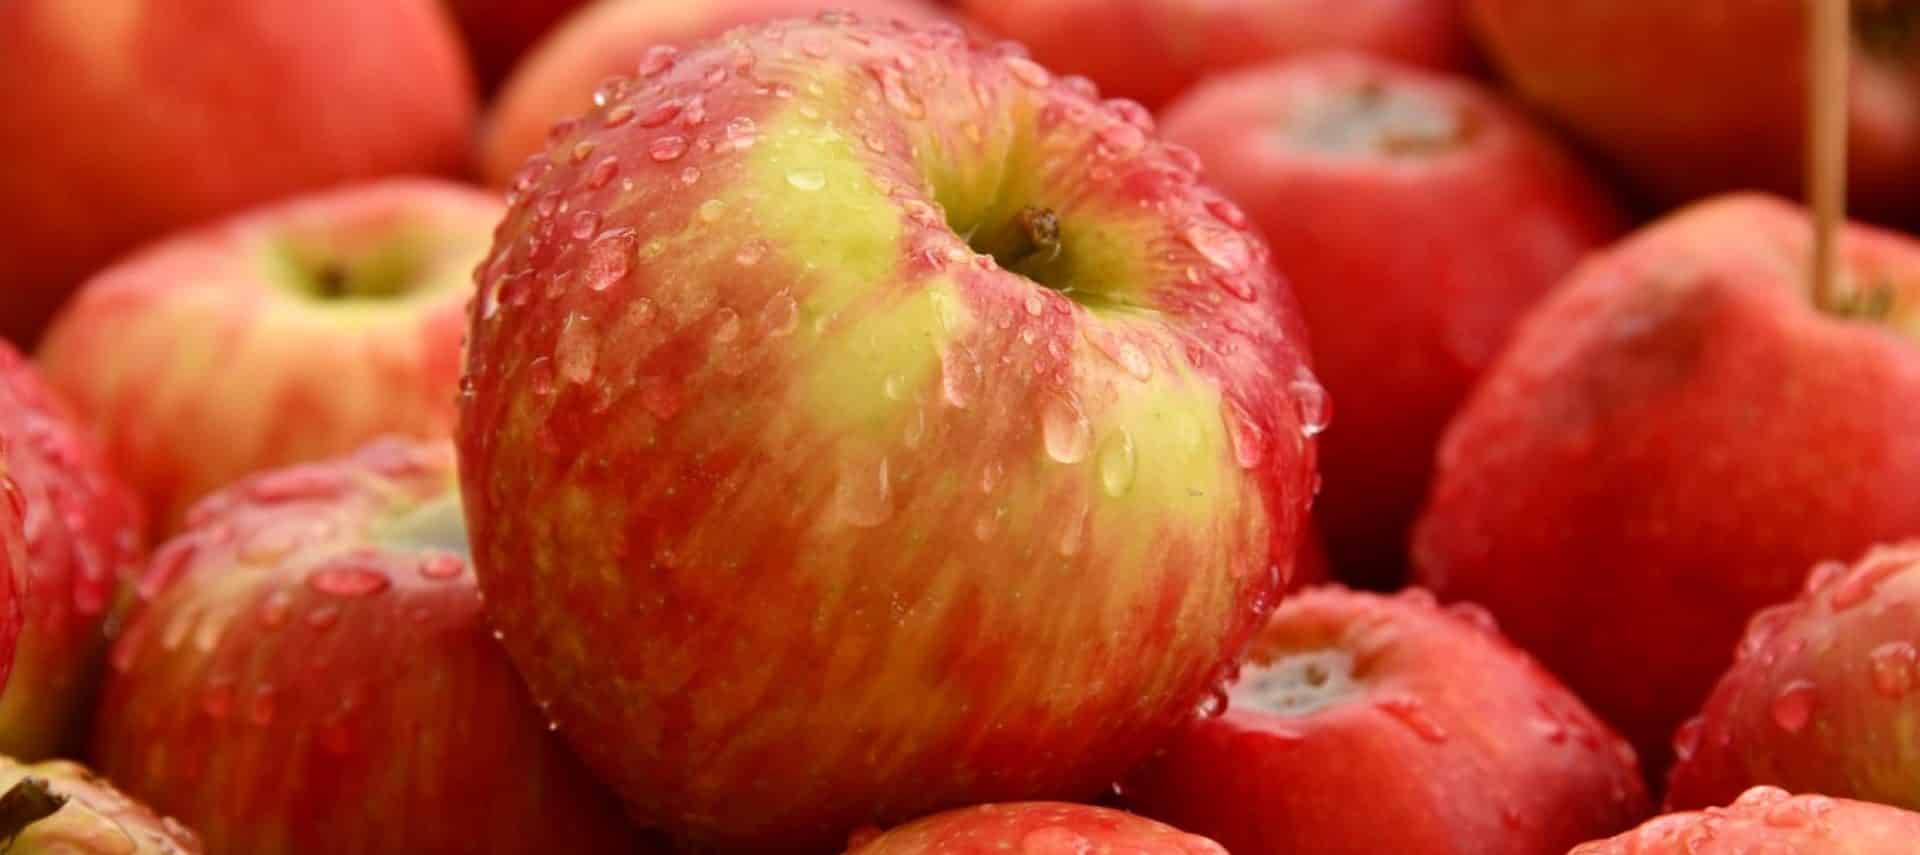 ripe red apples glistening with dew